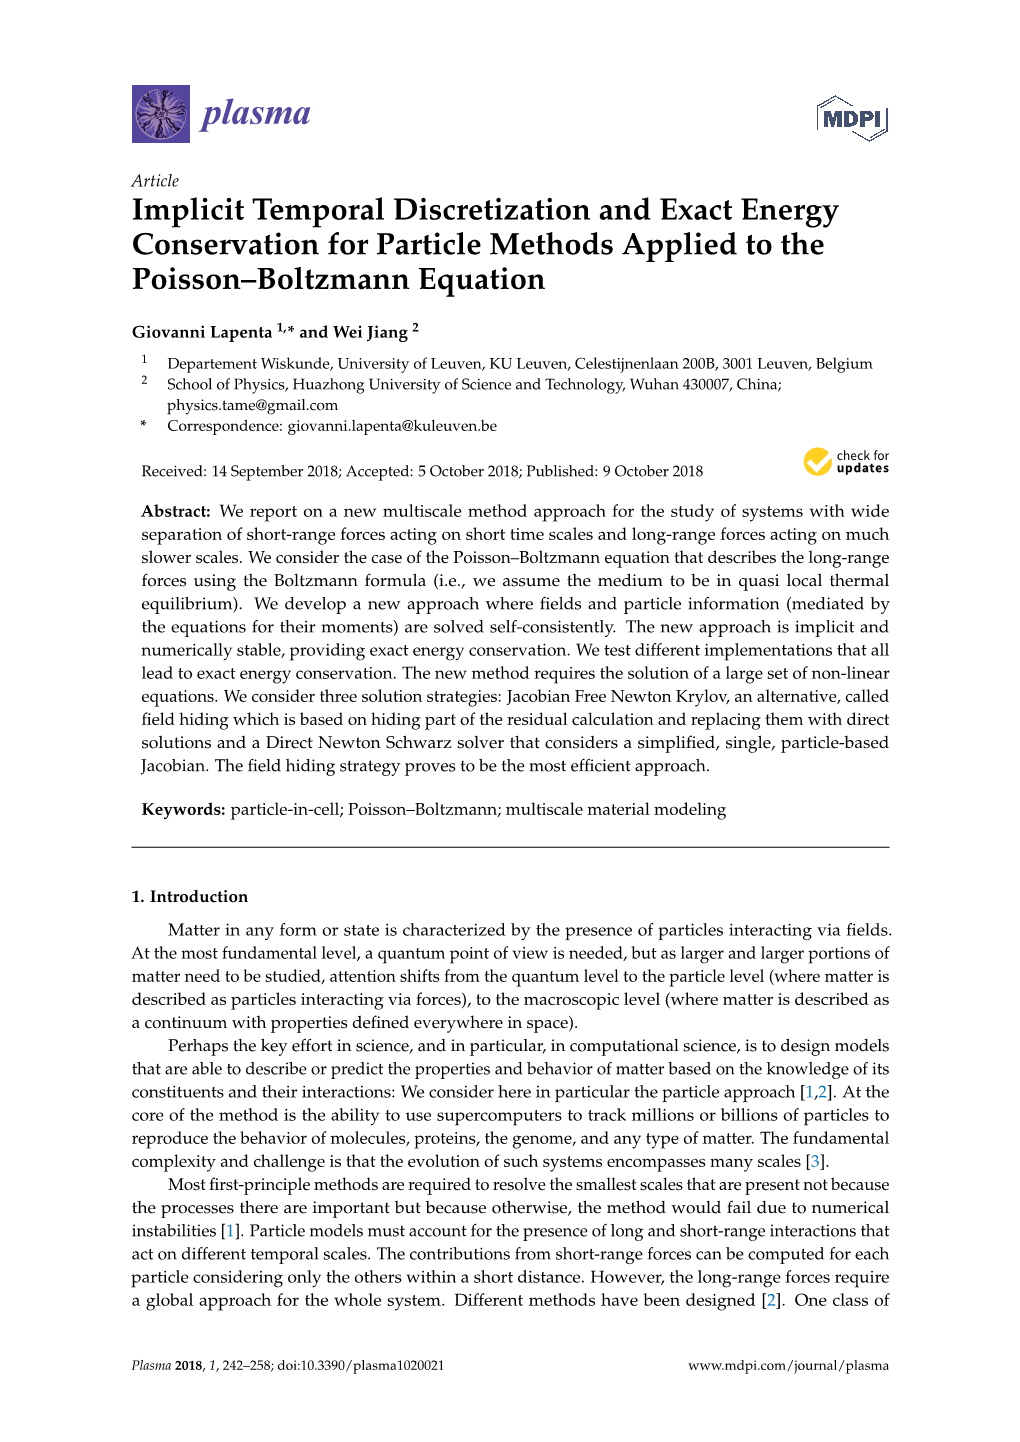 Implicit Temporal Discretization and Exact Energy Conservation for Particle Methods Applied to the Poisson–Boltzmann Equation